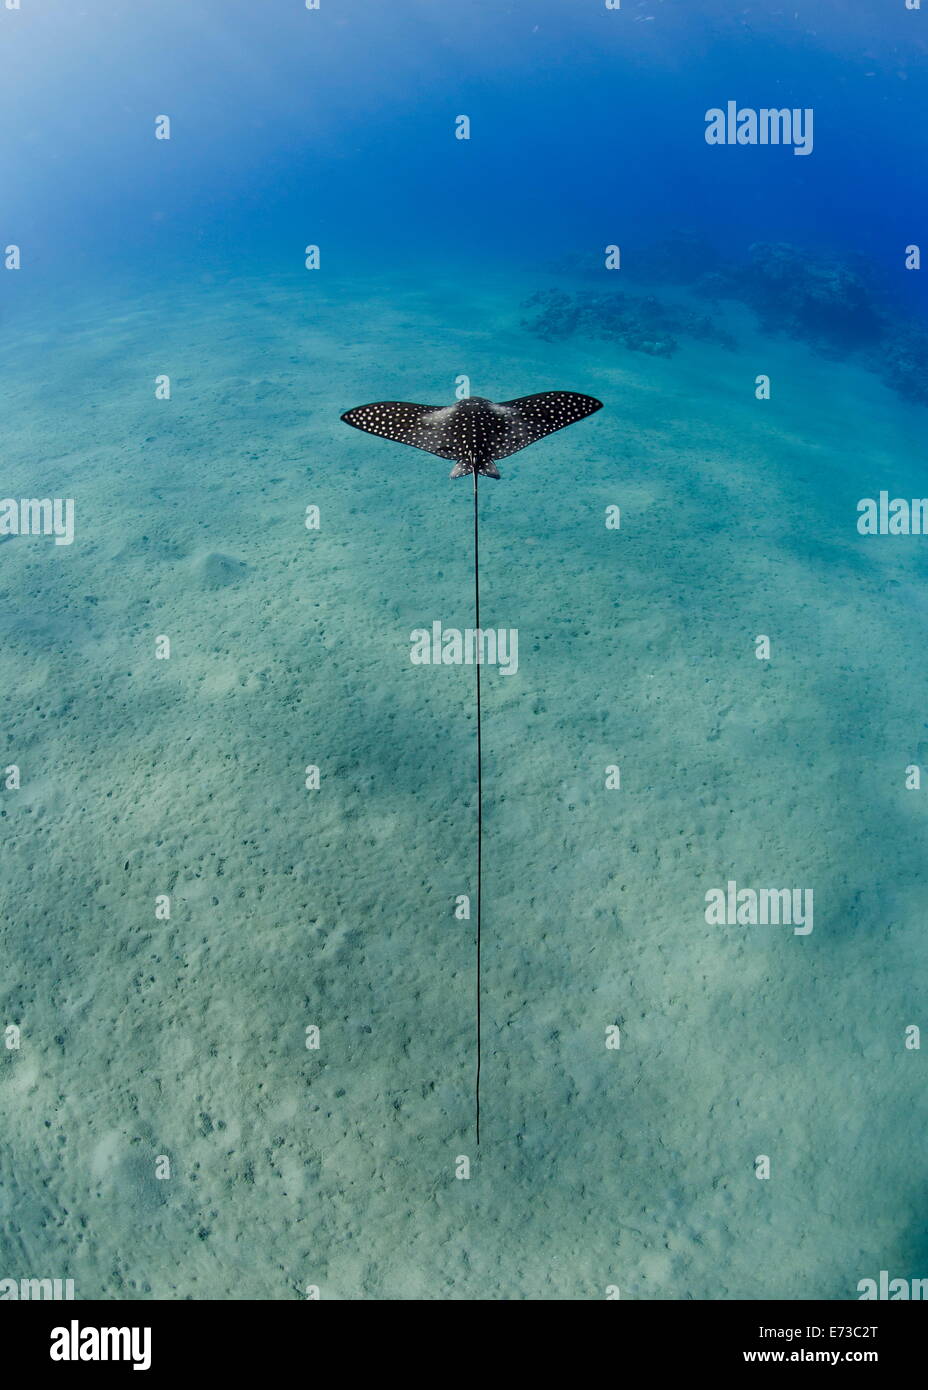 Spotted Eagle Ray Juvenile Over Sandy Ocean Floor From Above